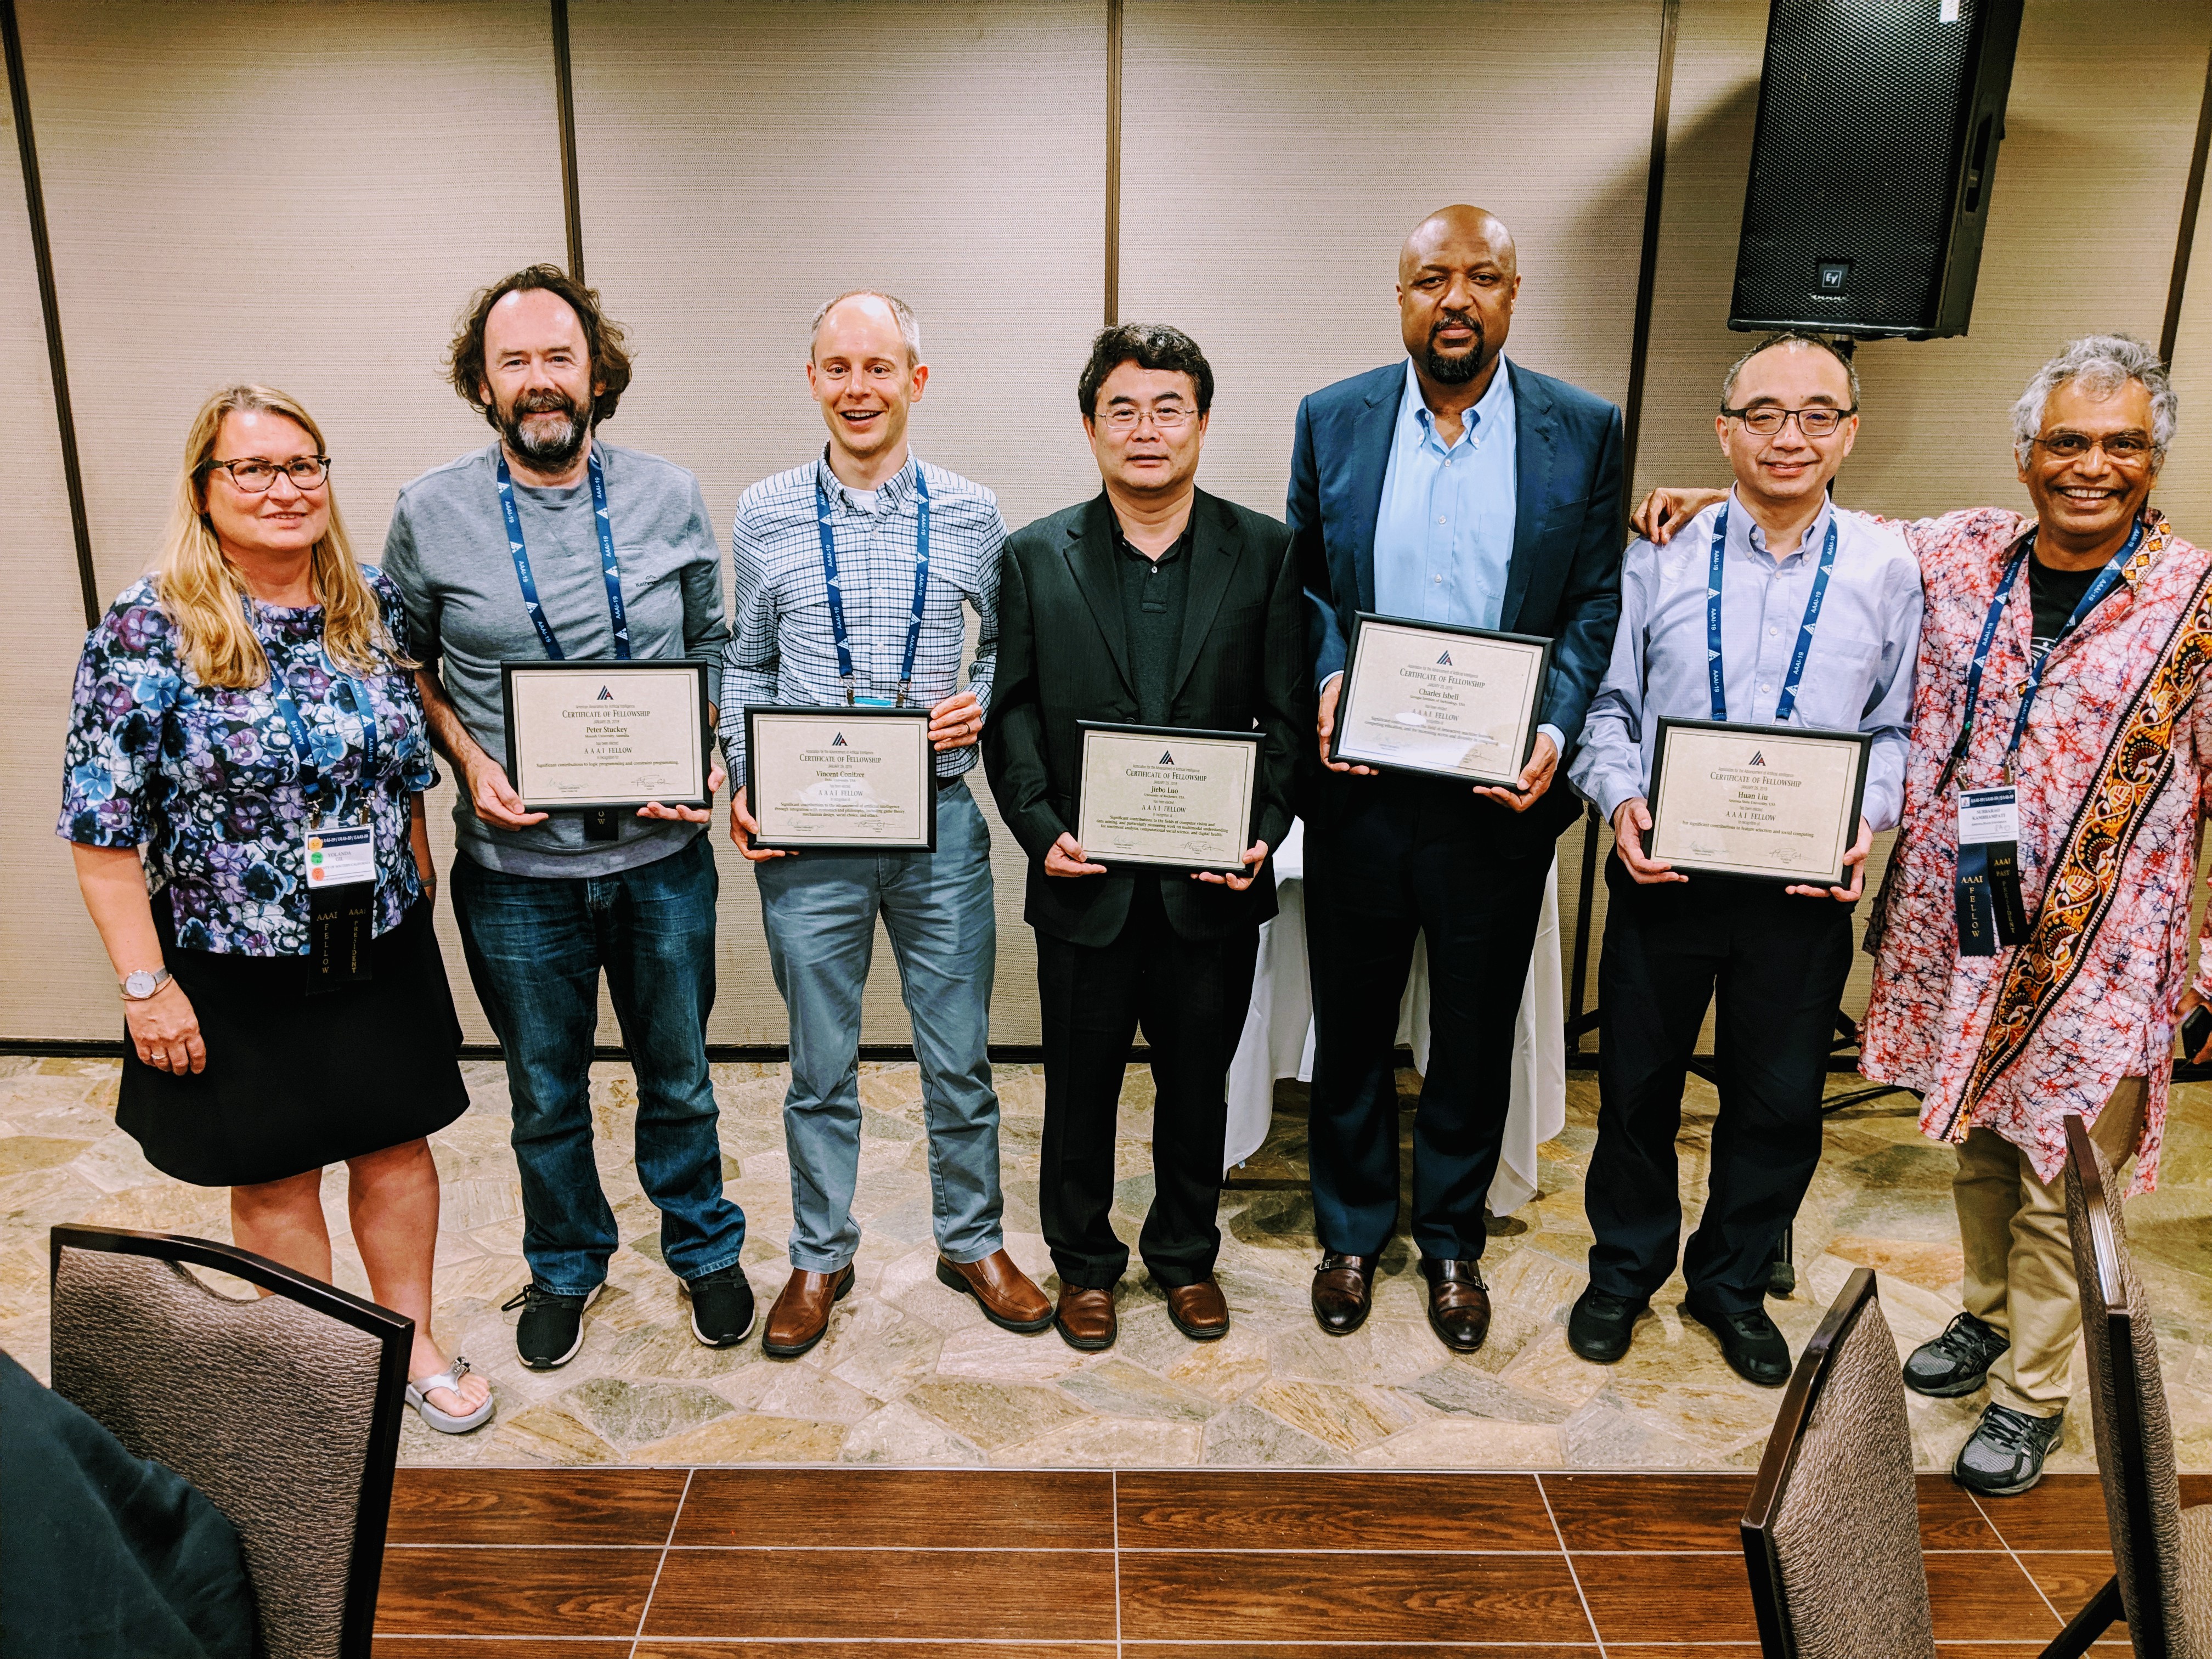 Prof. Luo (center) with other IEEE fellows at the 2019 IEEE Meeting